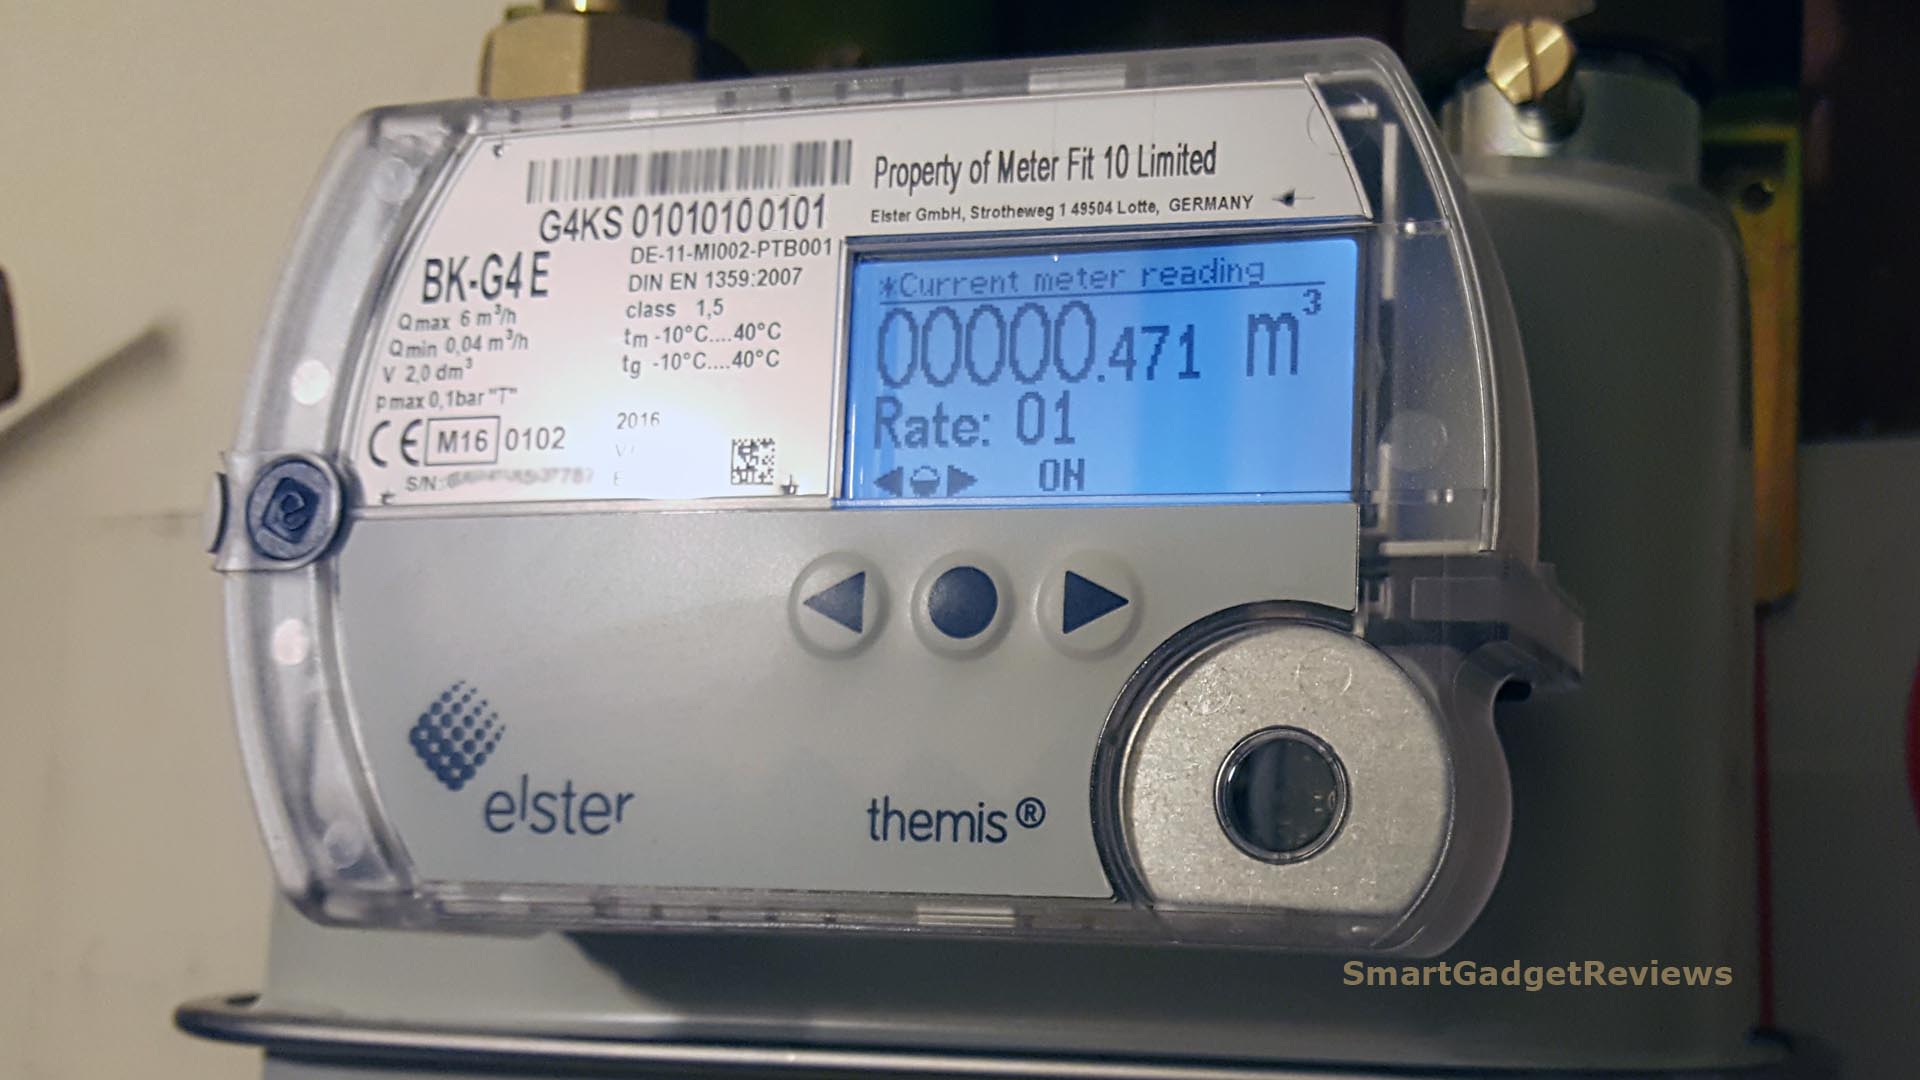 Smart meters allow for meter readings to automatically be sent direct to the Energy supplier, so you don’t have to read your meter, ending estimated bills.